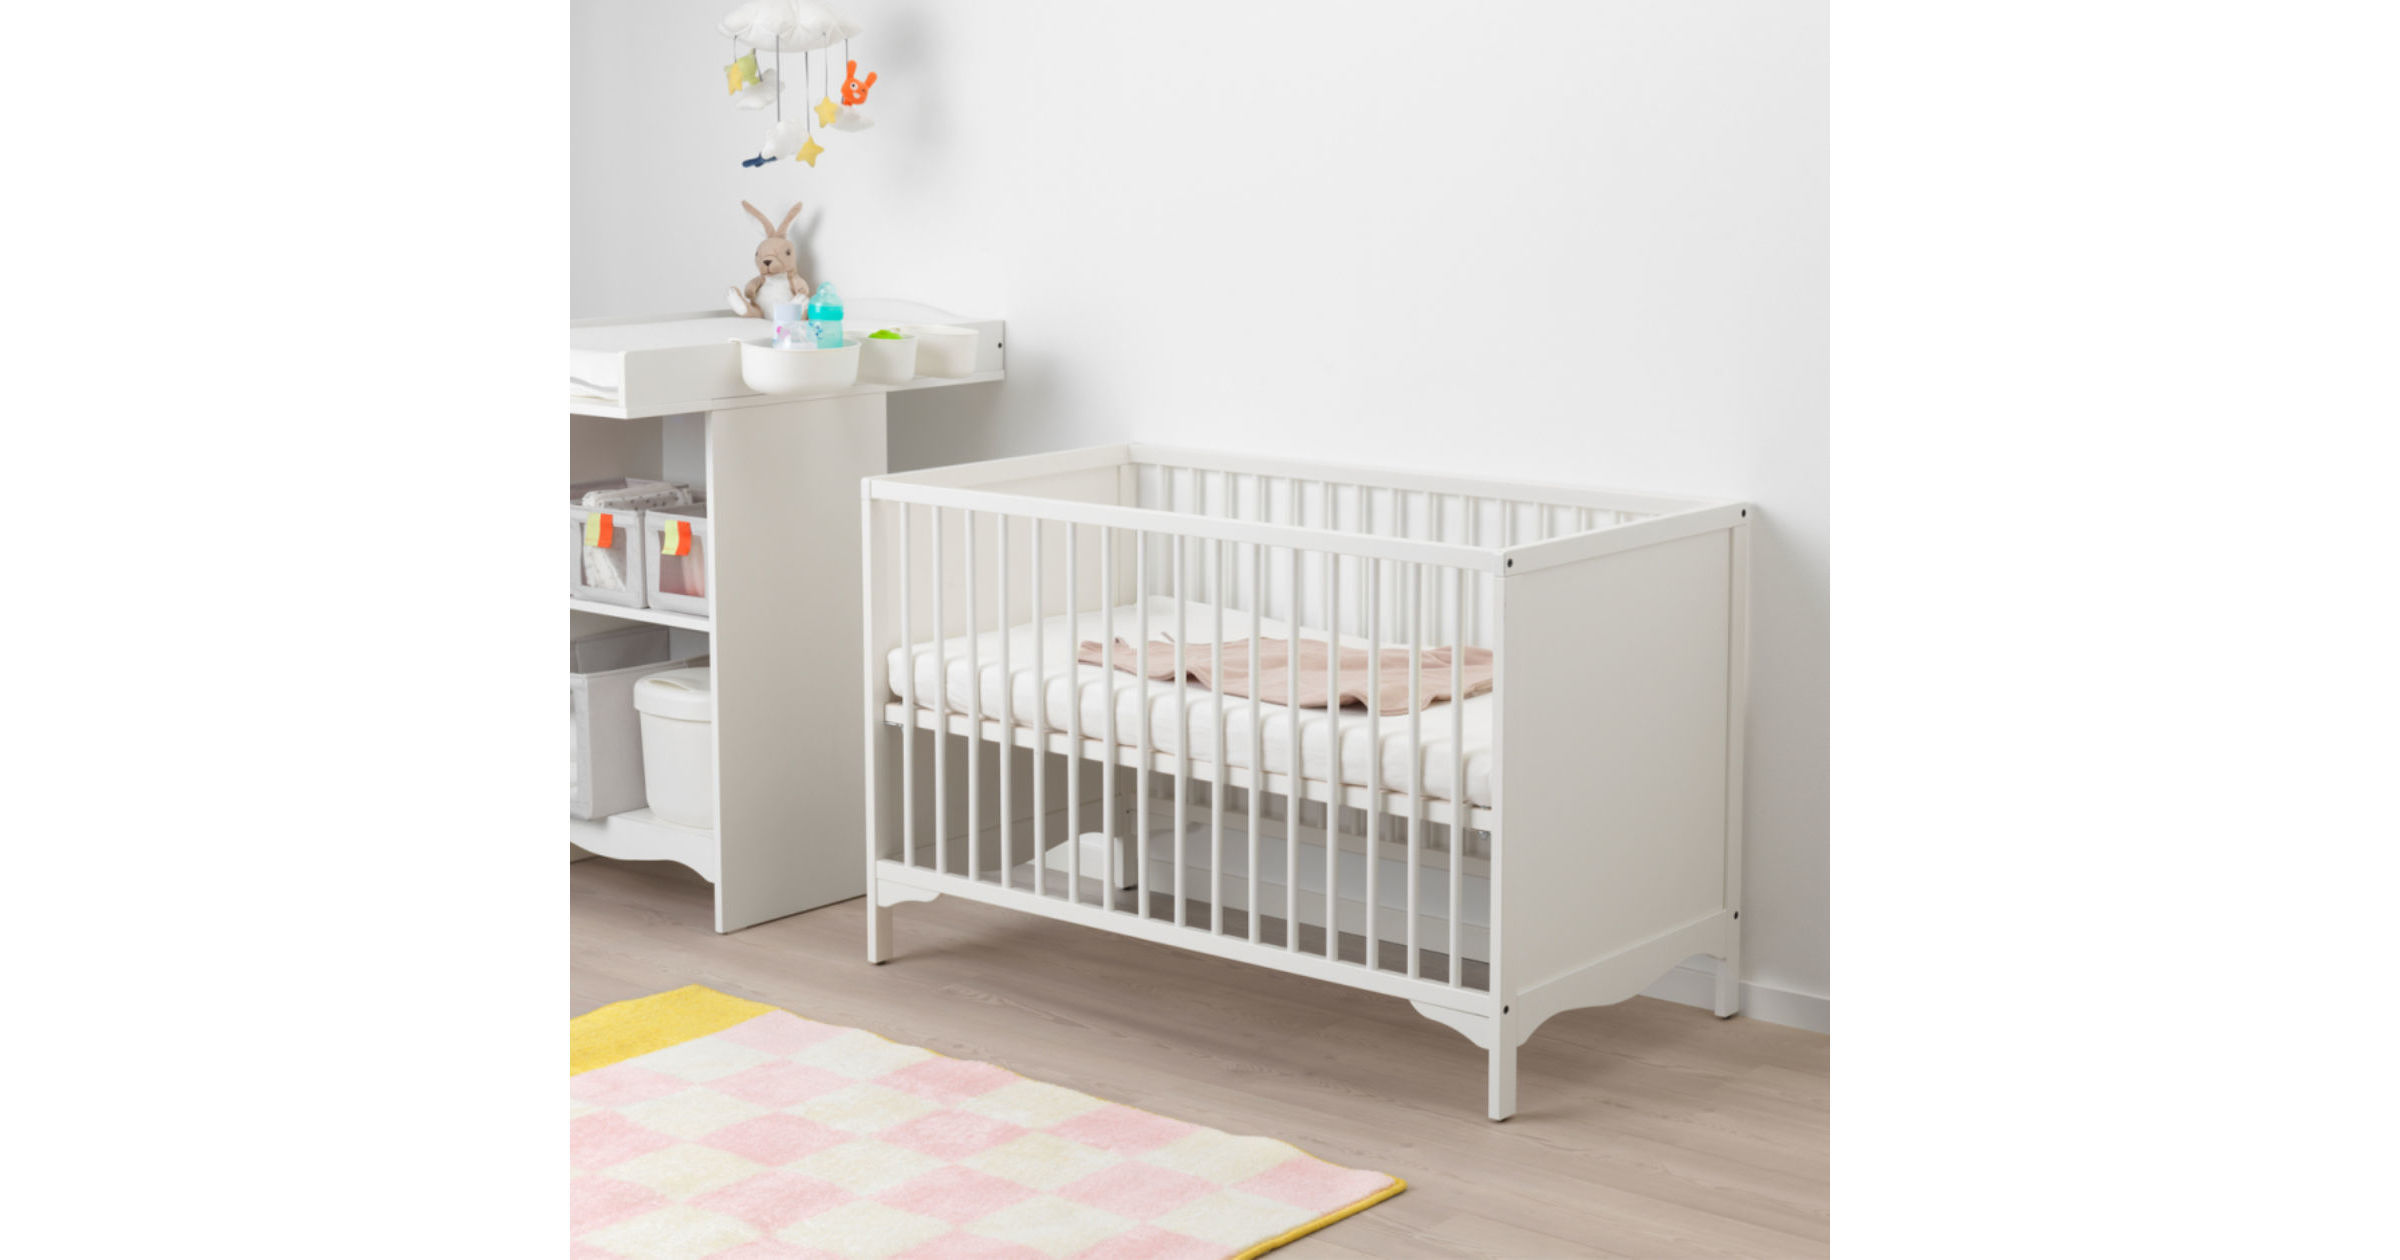 ikea baby cot mattress cover